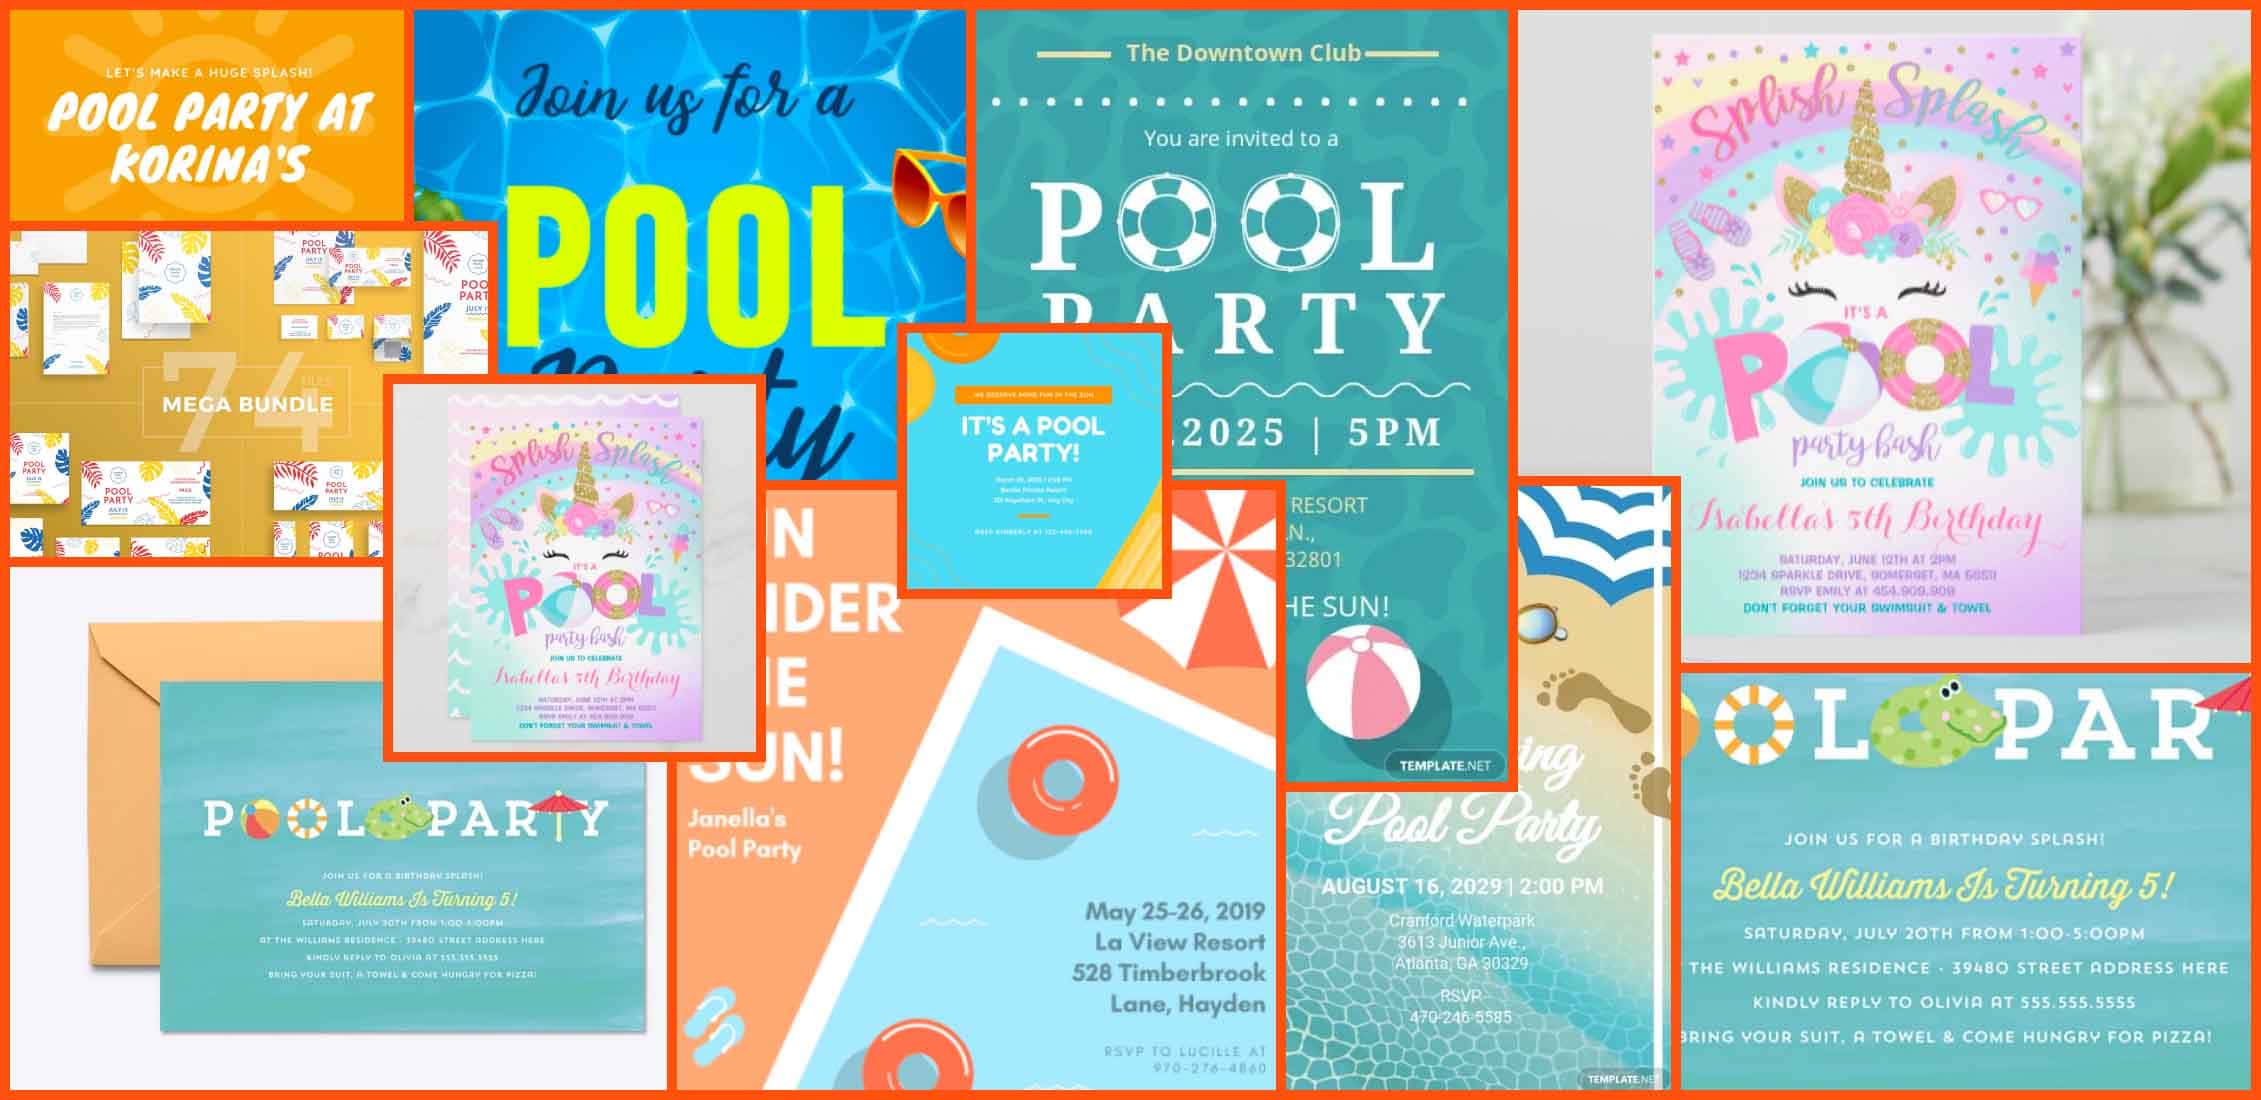 Best Pool Party Invitations Example.